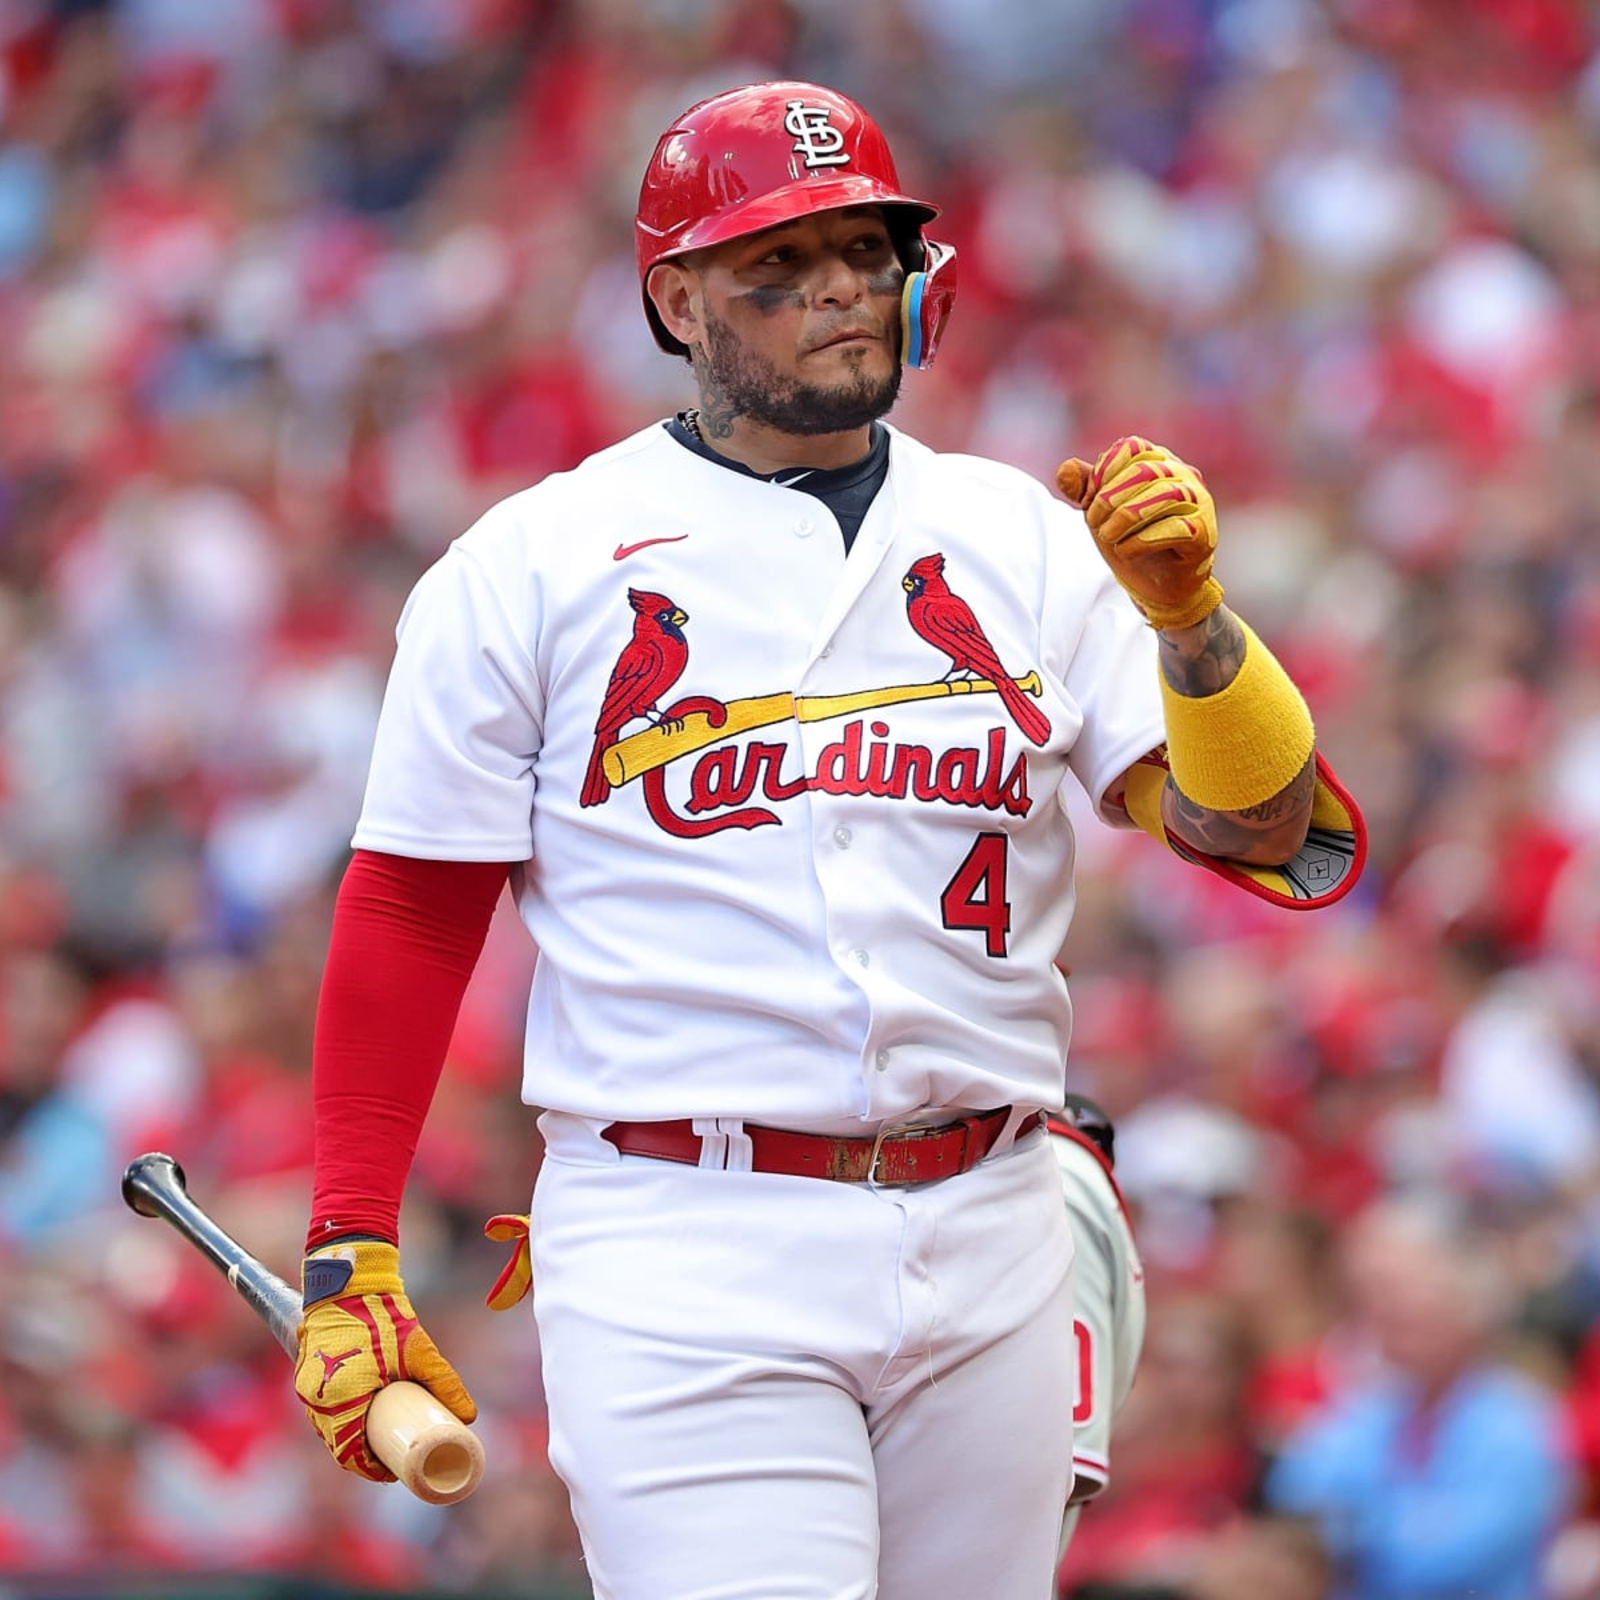 St. Louis Cardinals: What are the most valuable Cardinals baseball